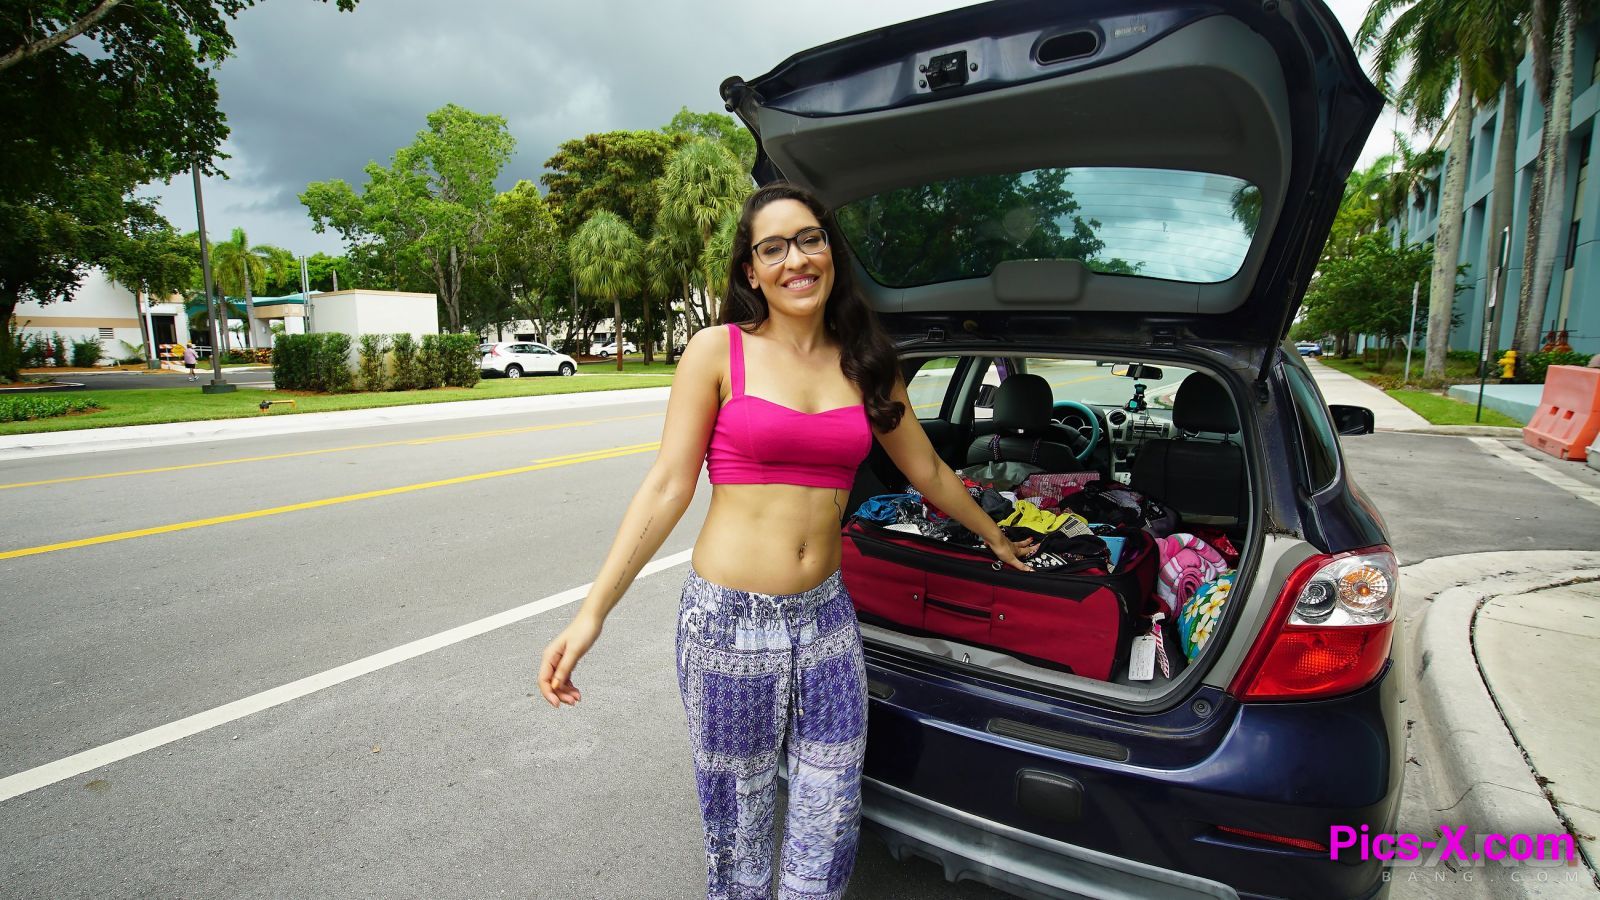 Xaya Lovelle is a hippie chick that will fuck to get her car fixed - Image 11